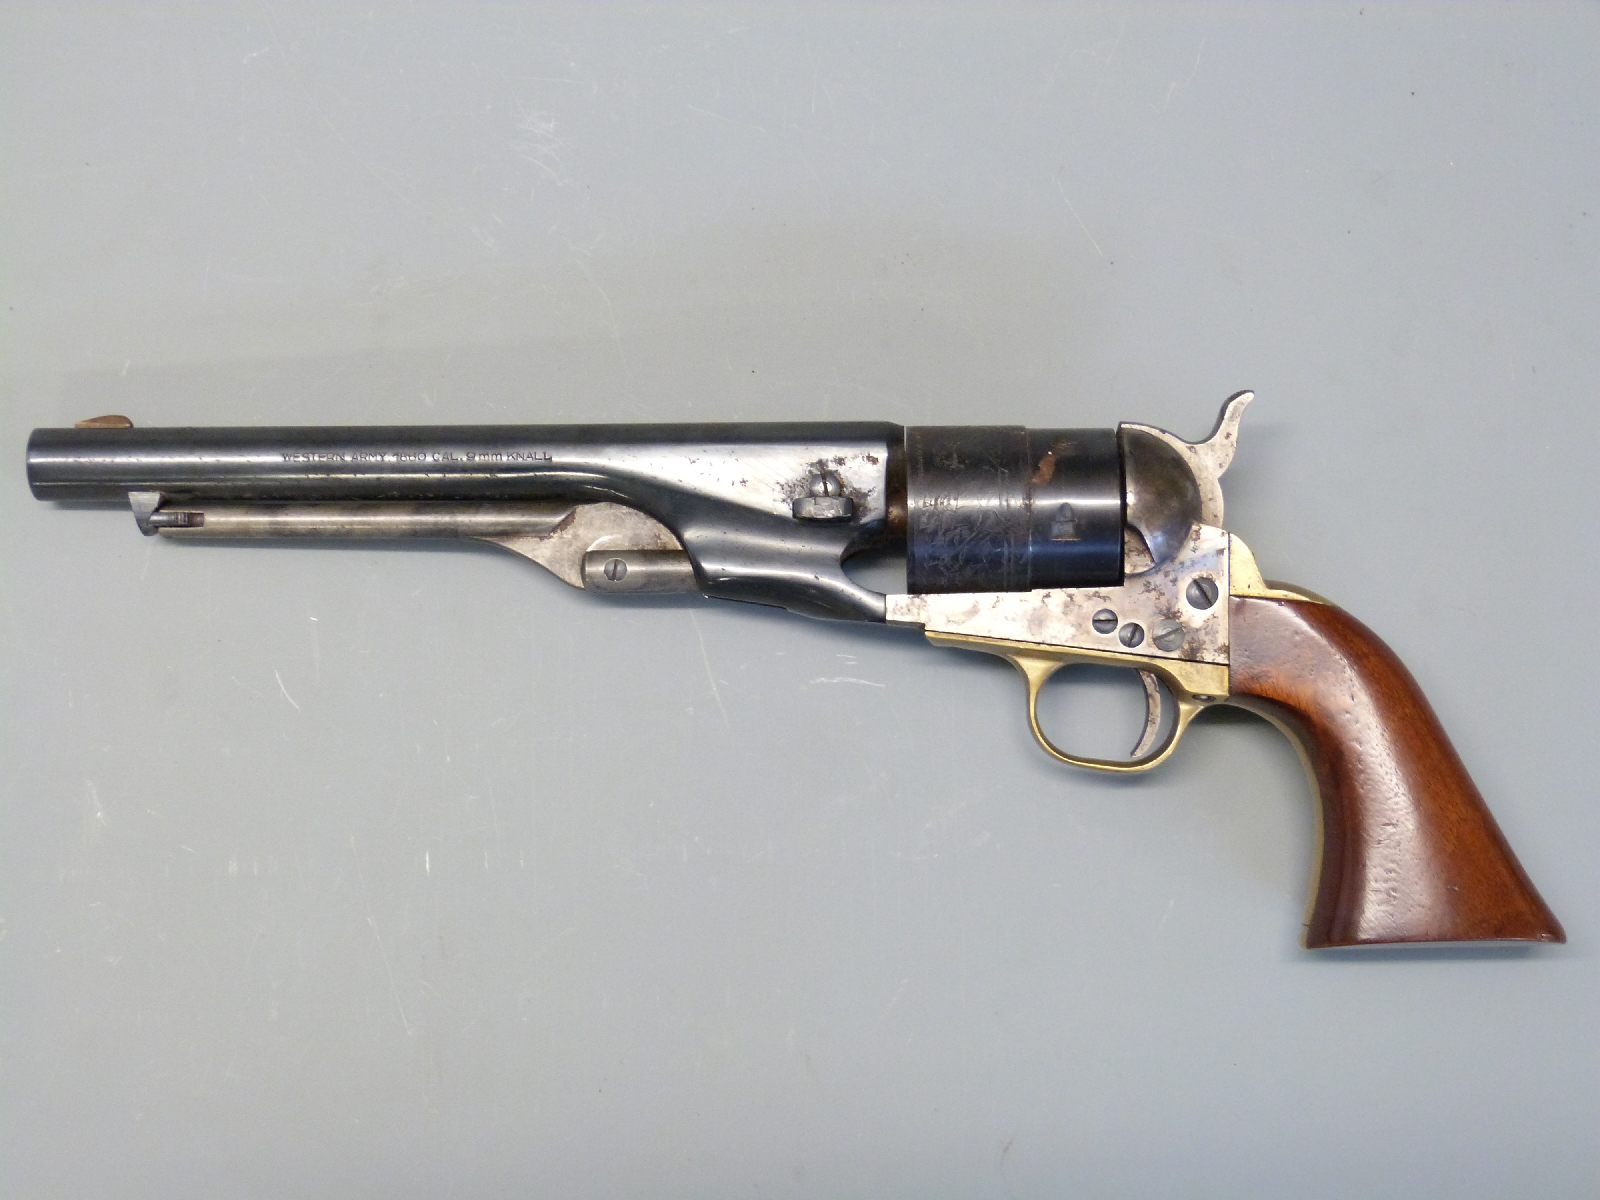 Pietta Western Army 1860 style 9mm blank firing six shot revolver with engraved scenes of ships to - Image 4 of 6